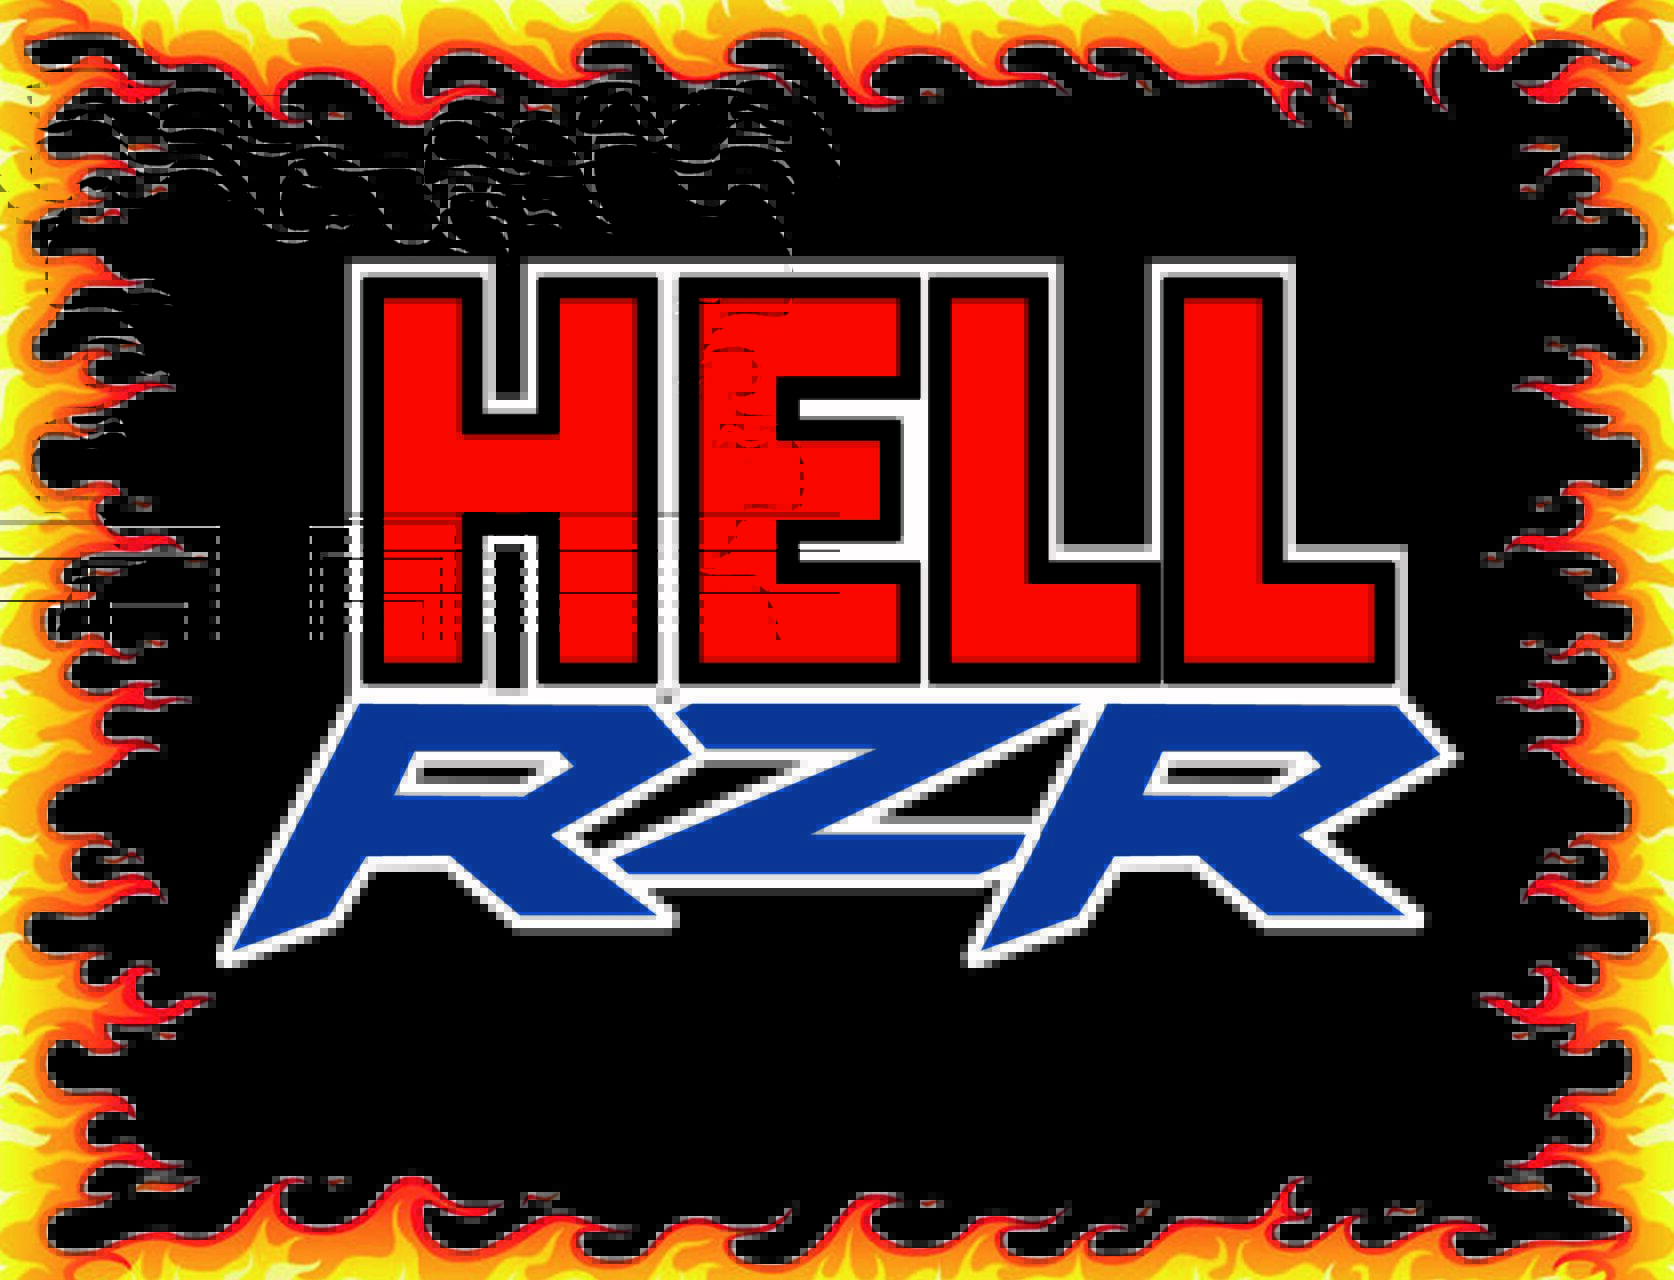 Custom HELL RZR FLAG Awesome Safety Flag for your UTV Fits on all whips/poles 